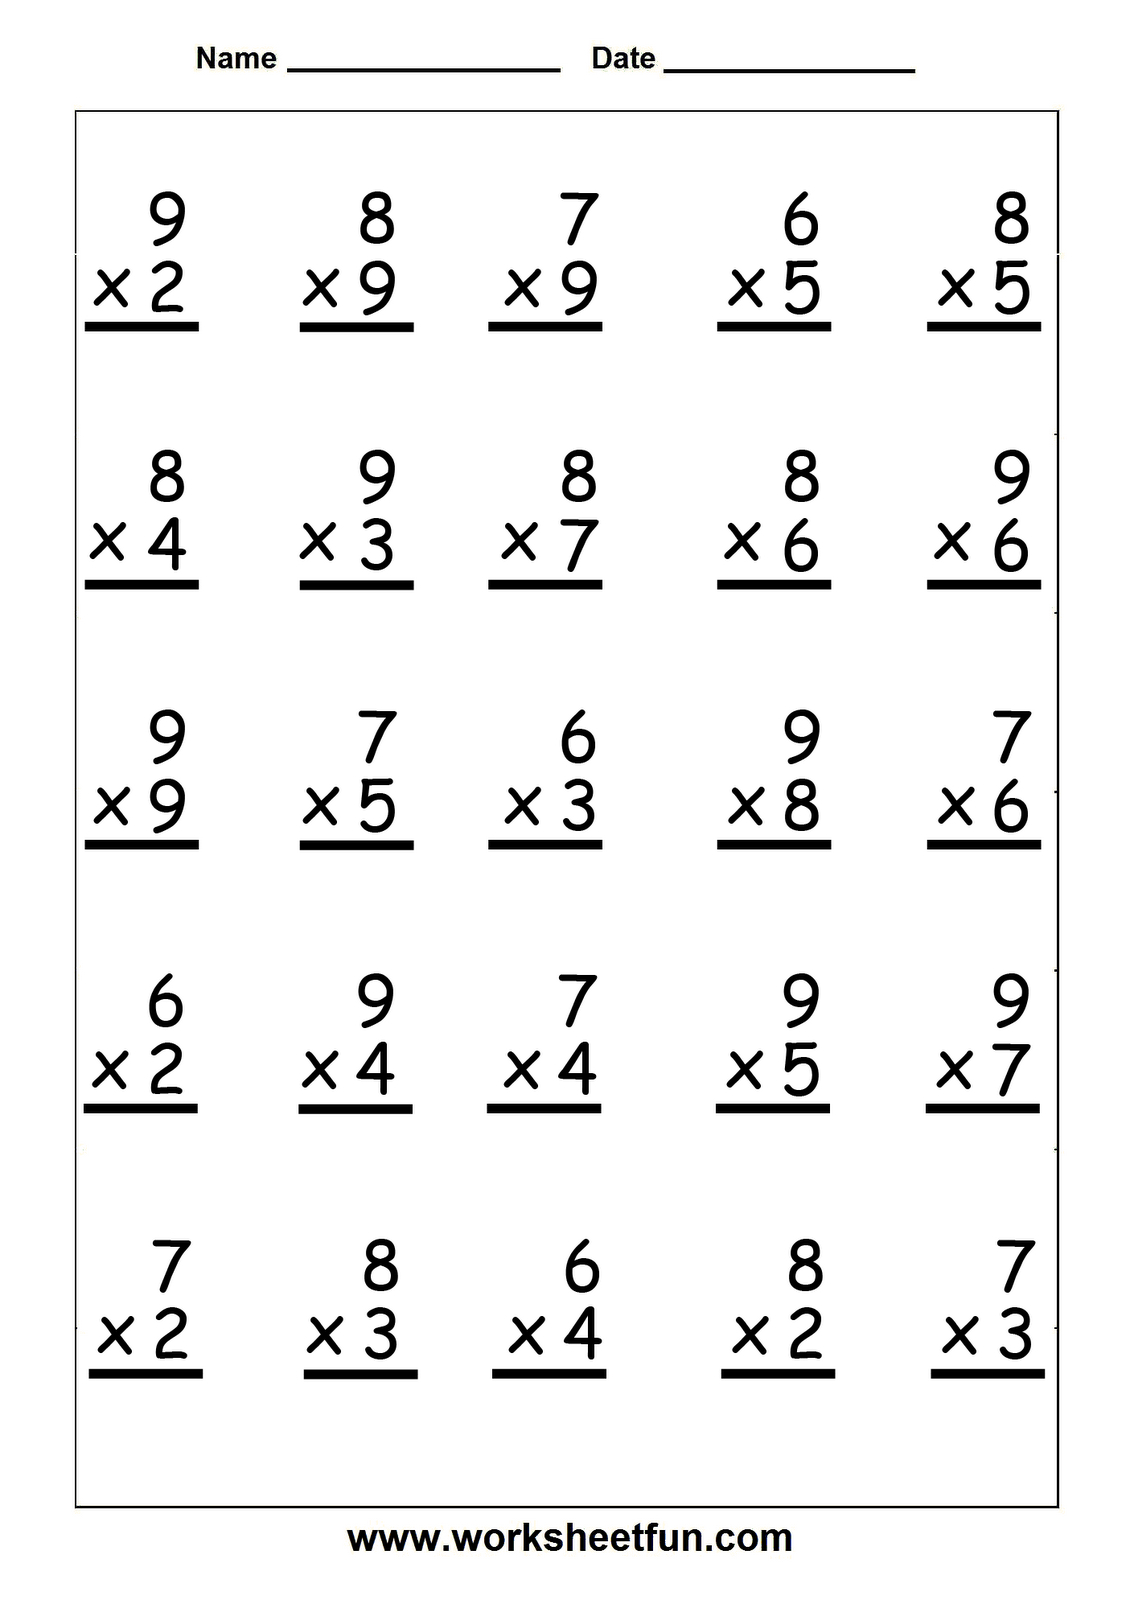 Free Printable Multiplication Worksheets | Multiplication Worksheets - Free Printable Math Worksheets For Adults